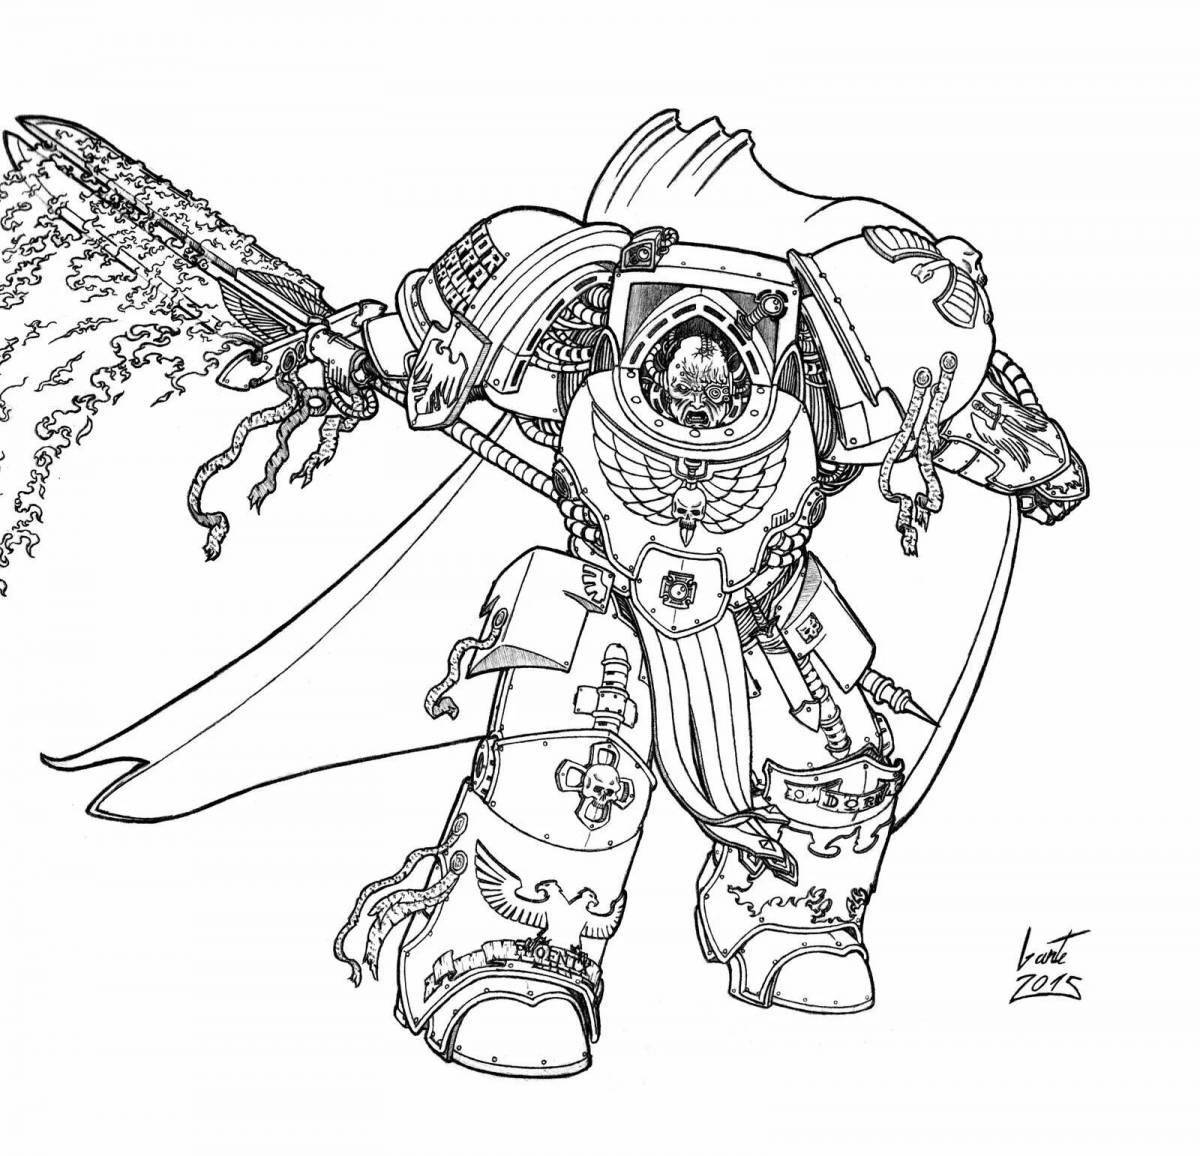 Great warhammer coloring page